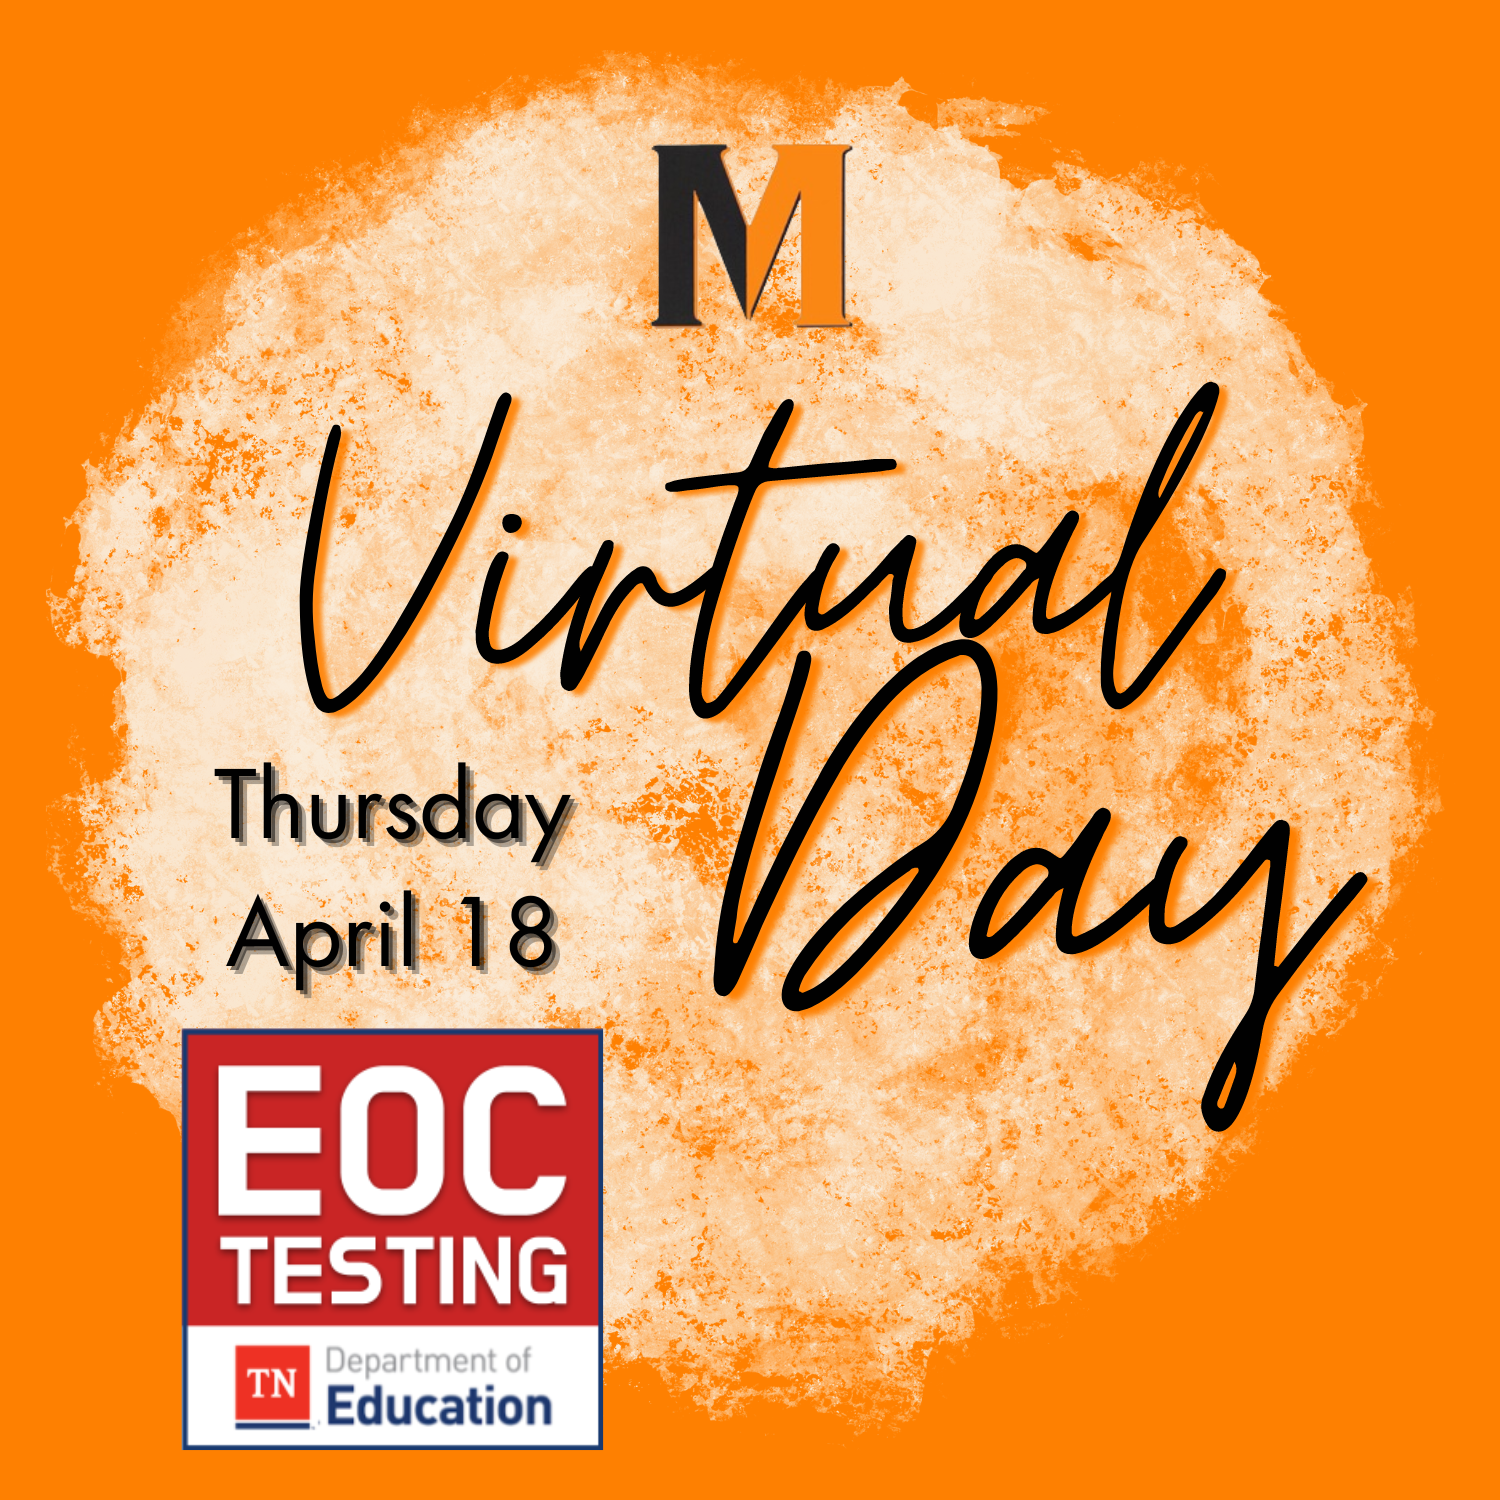 orange background with power m words virtual day thursday april 18 eoc testing